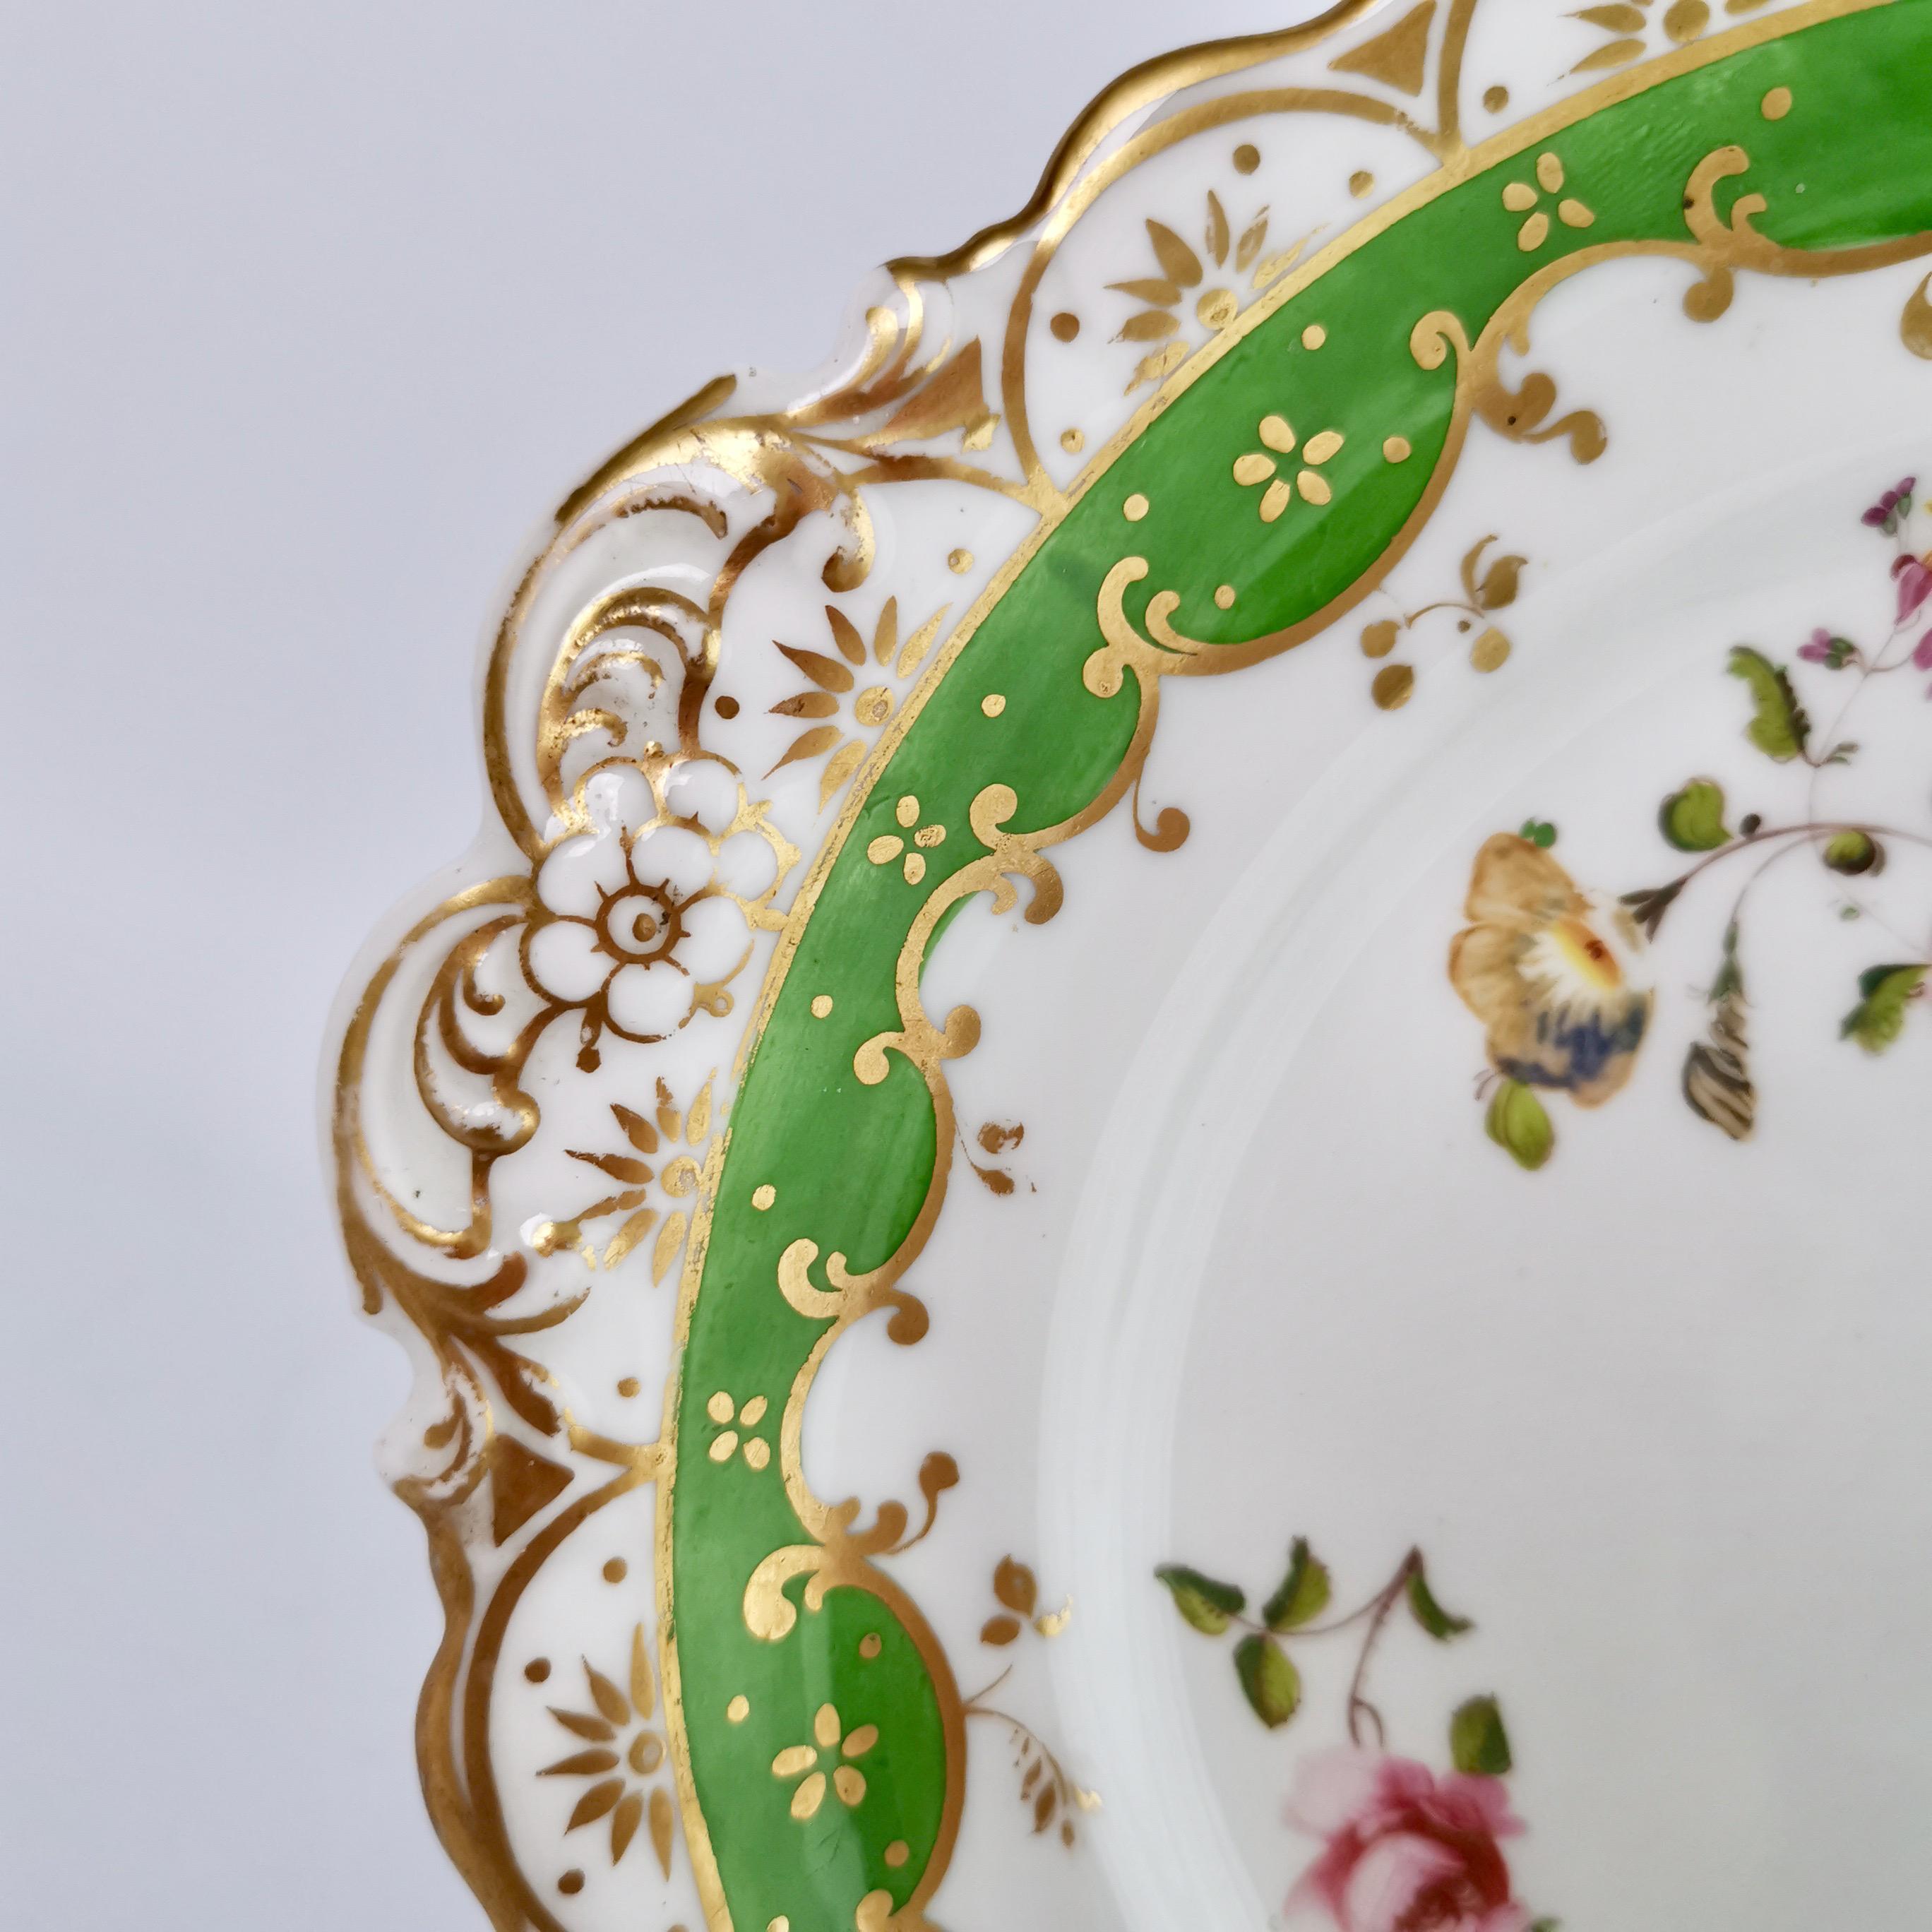 Regency Ridgway Porcelain Plate, Green with Hand Painted Flowers, ca 1832